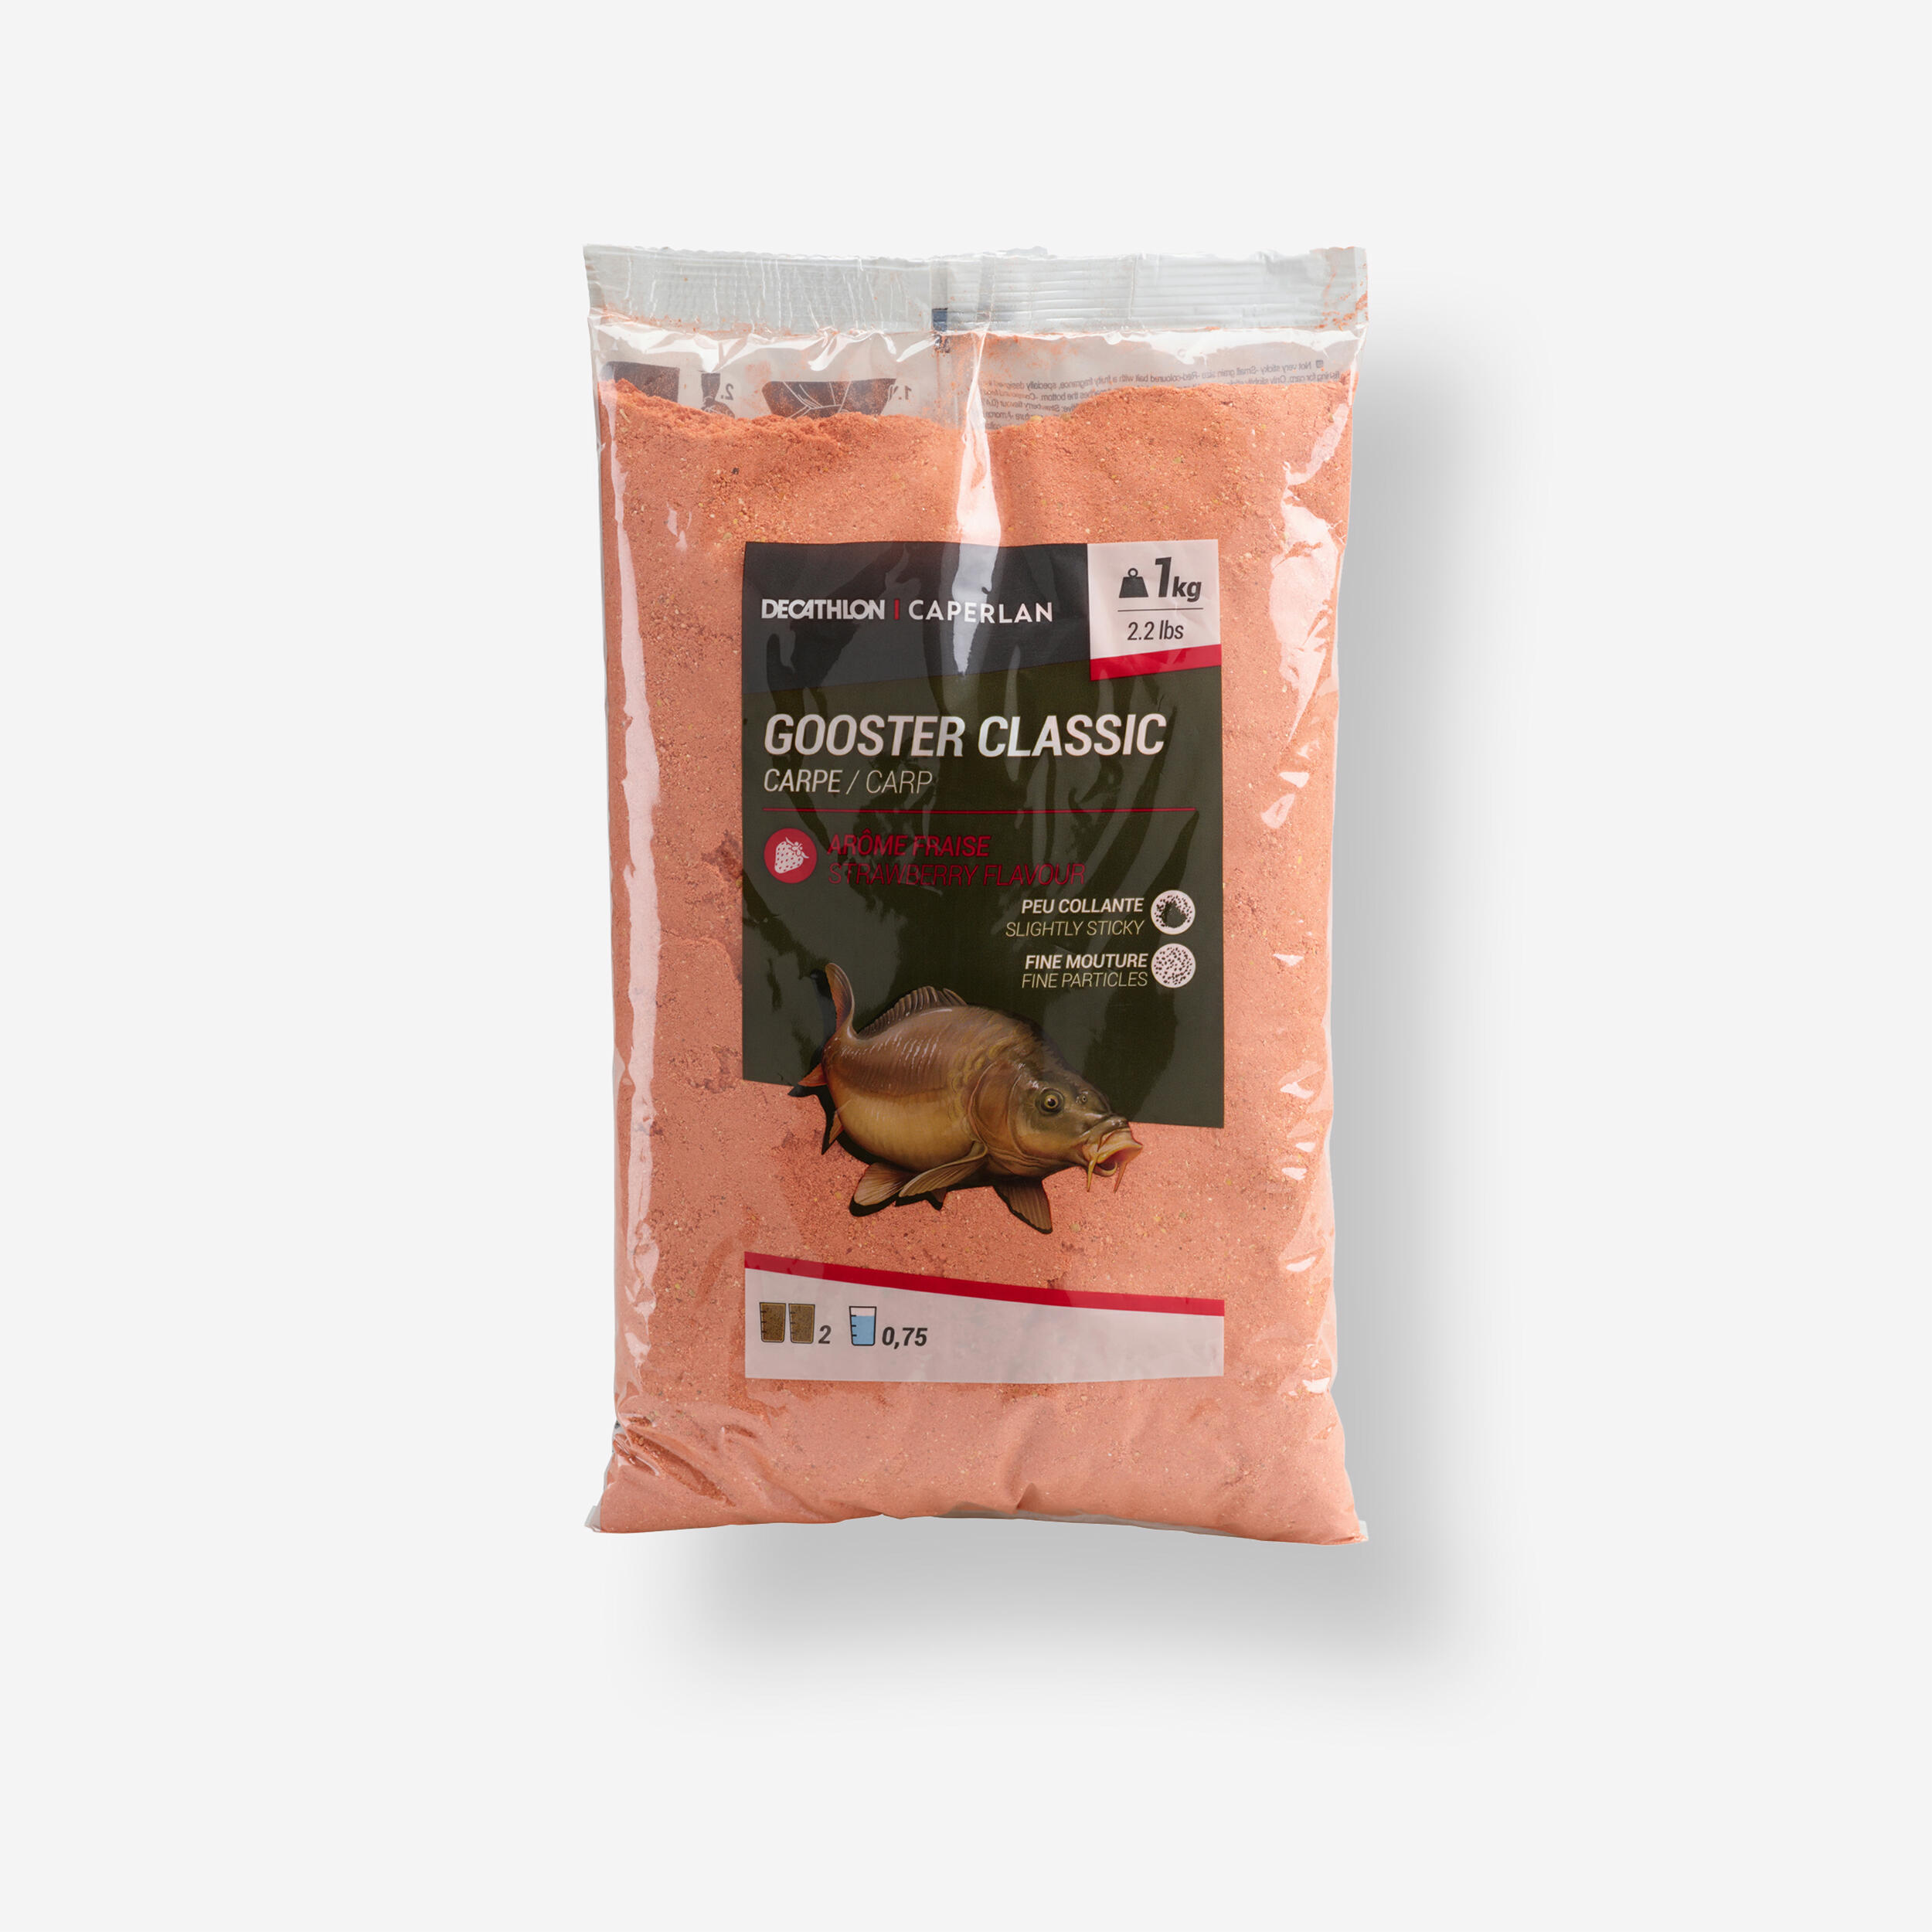 CAPERLAN GOOSTER CLASSIC CARP BAIT RED STRAWBERRY 1kg